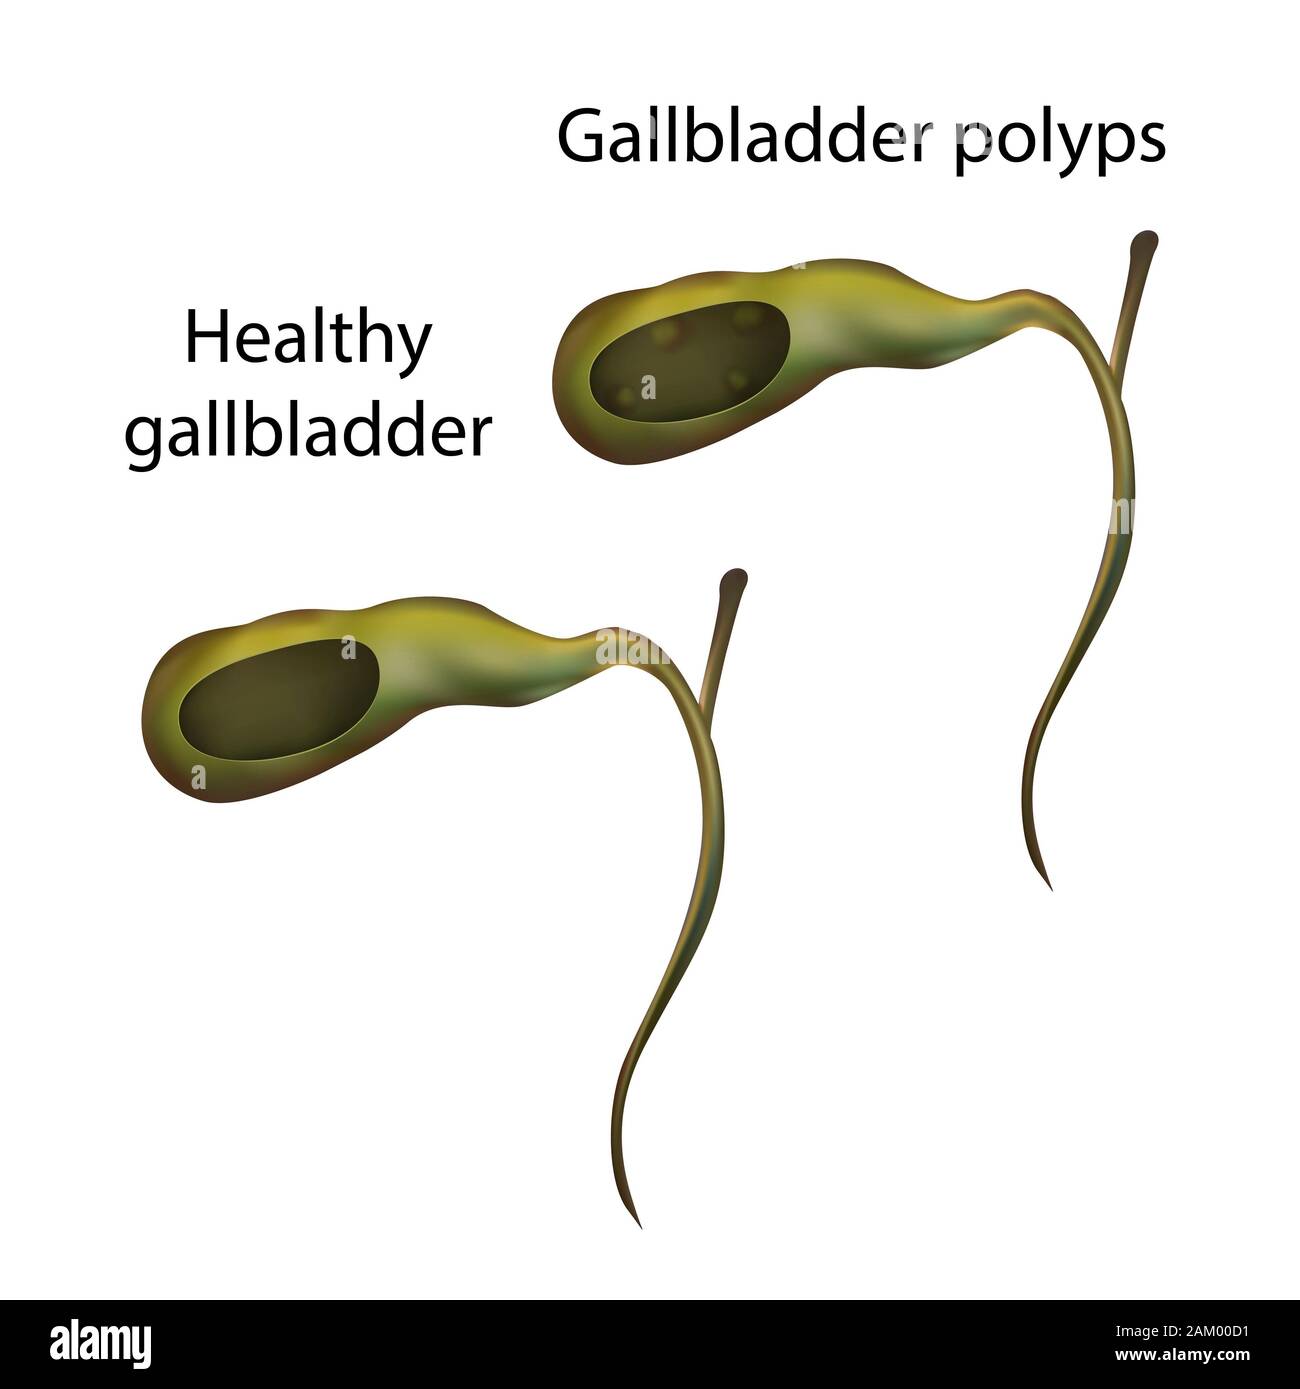 Gallbladder Polyps: Symptoms, Causes What It Is, 56% OFF